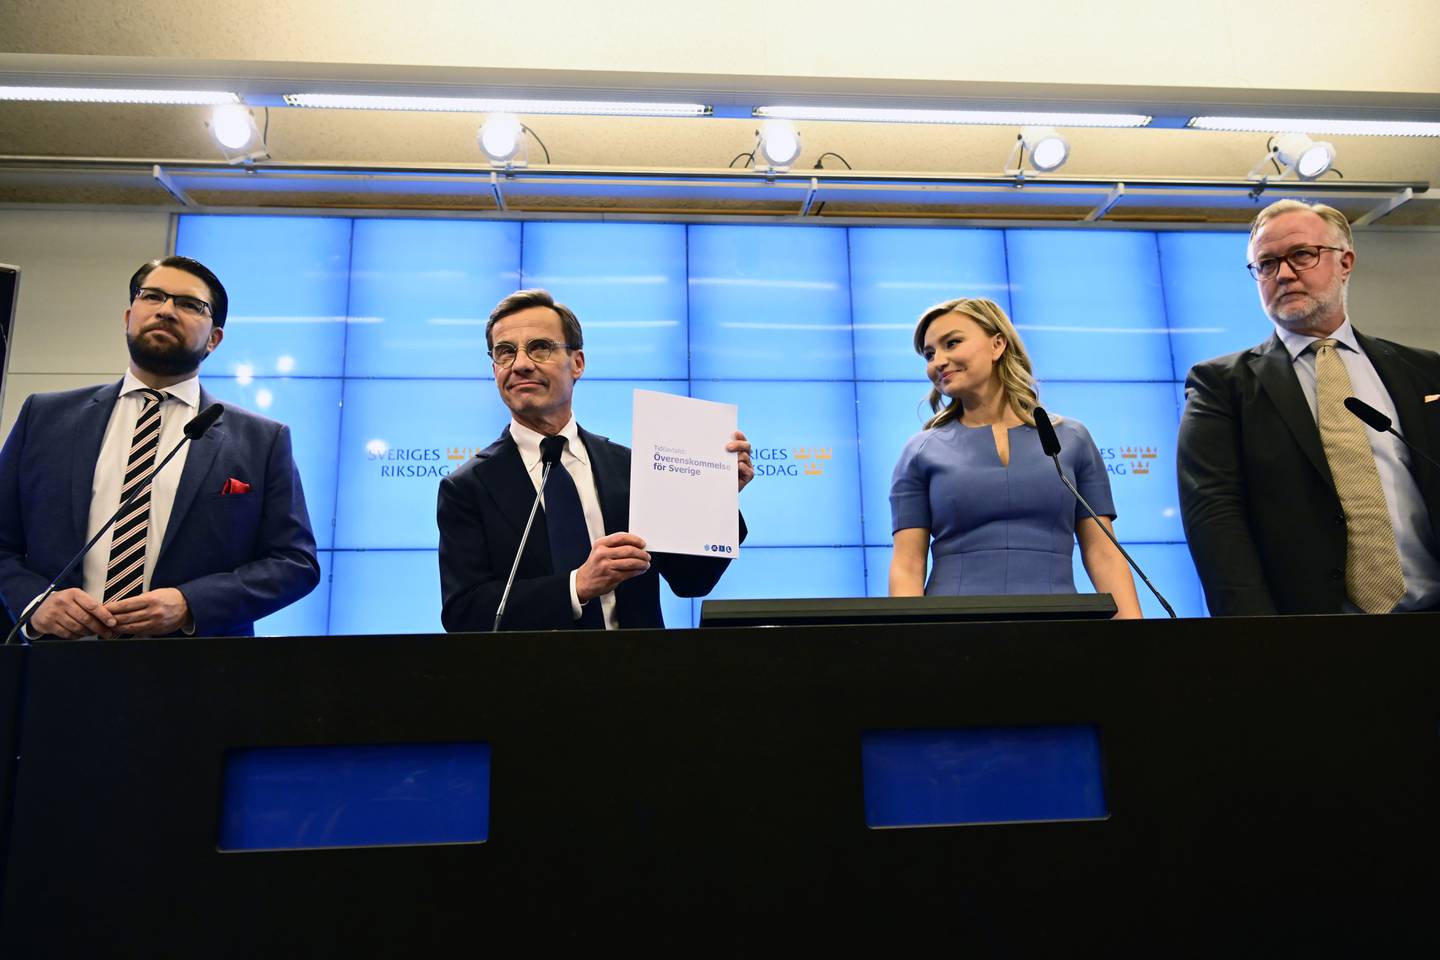 From left: Jimmie Åkesson, leader of the Sweden Democrats Party, Ulf Kristersson, leader of the Moderate Party, Ebba Busch, leader of the Christian Democrats, and Johan Pehrson, leader of the Liberal Party, attend a press conference regarding the formation of the government, at the Parliament in Stockholm, Sweden, Friday Oct. 14, 2022. (Jonas Ekströmer/TT News Agency via AP)